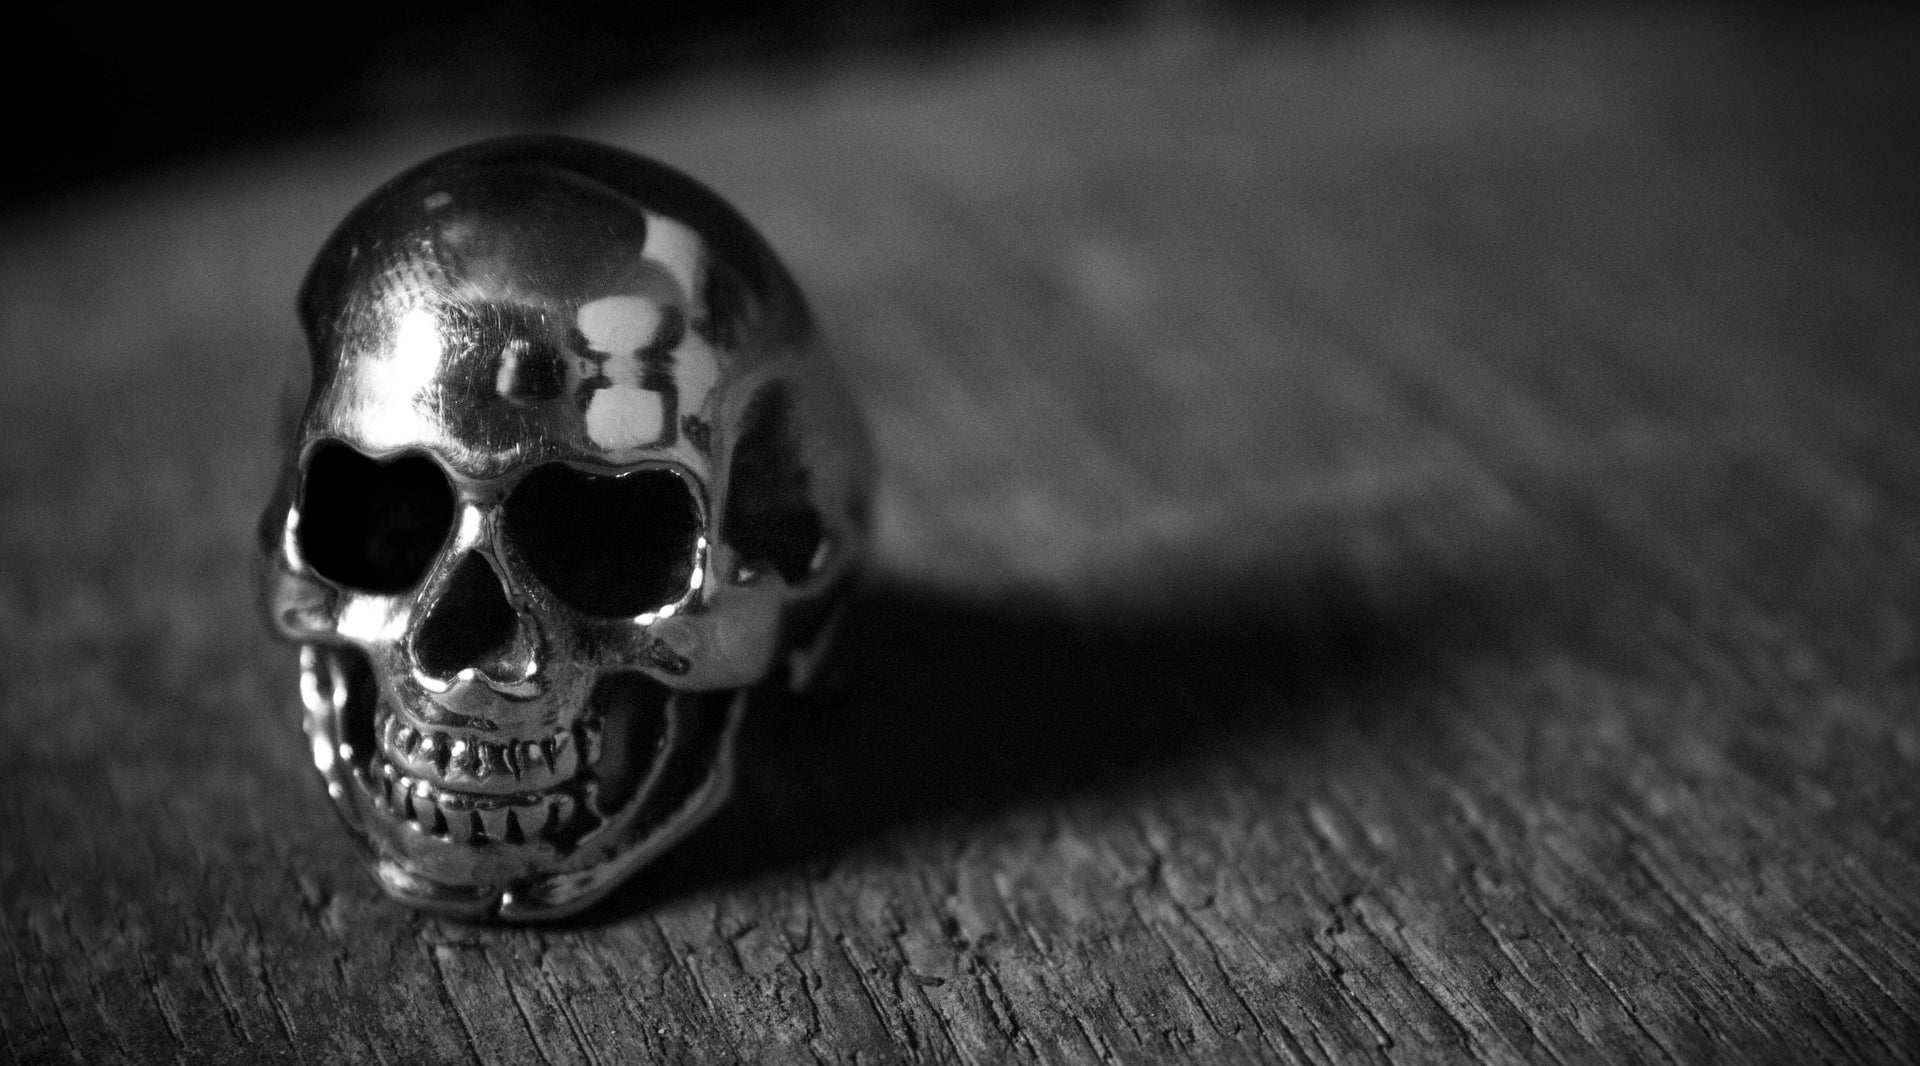 black and white photo of a skull ring on a wooden surface